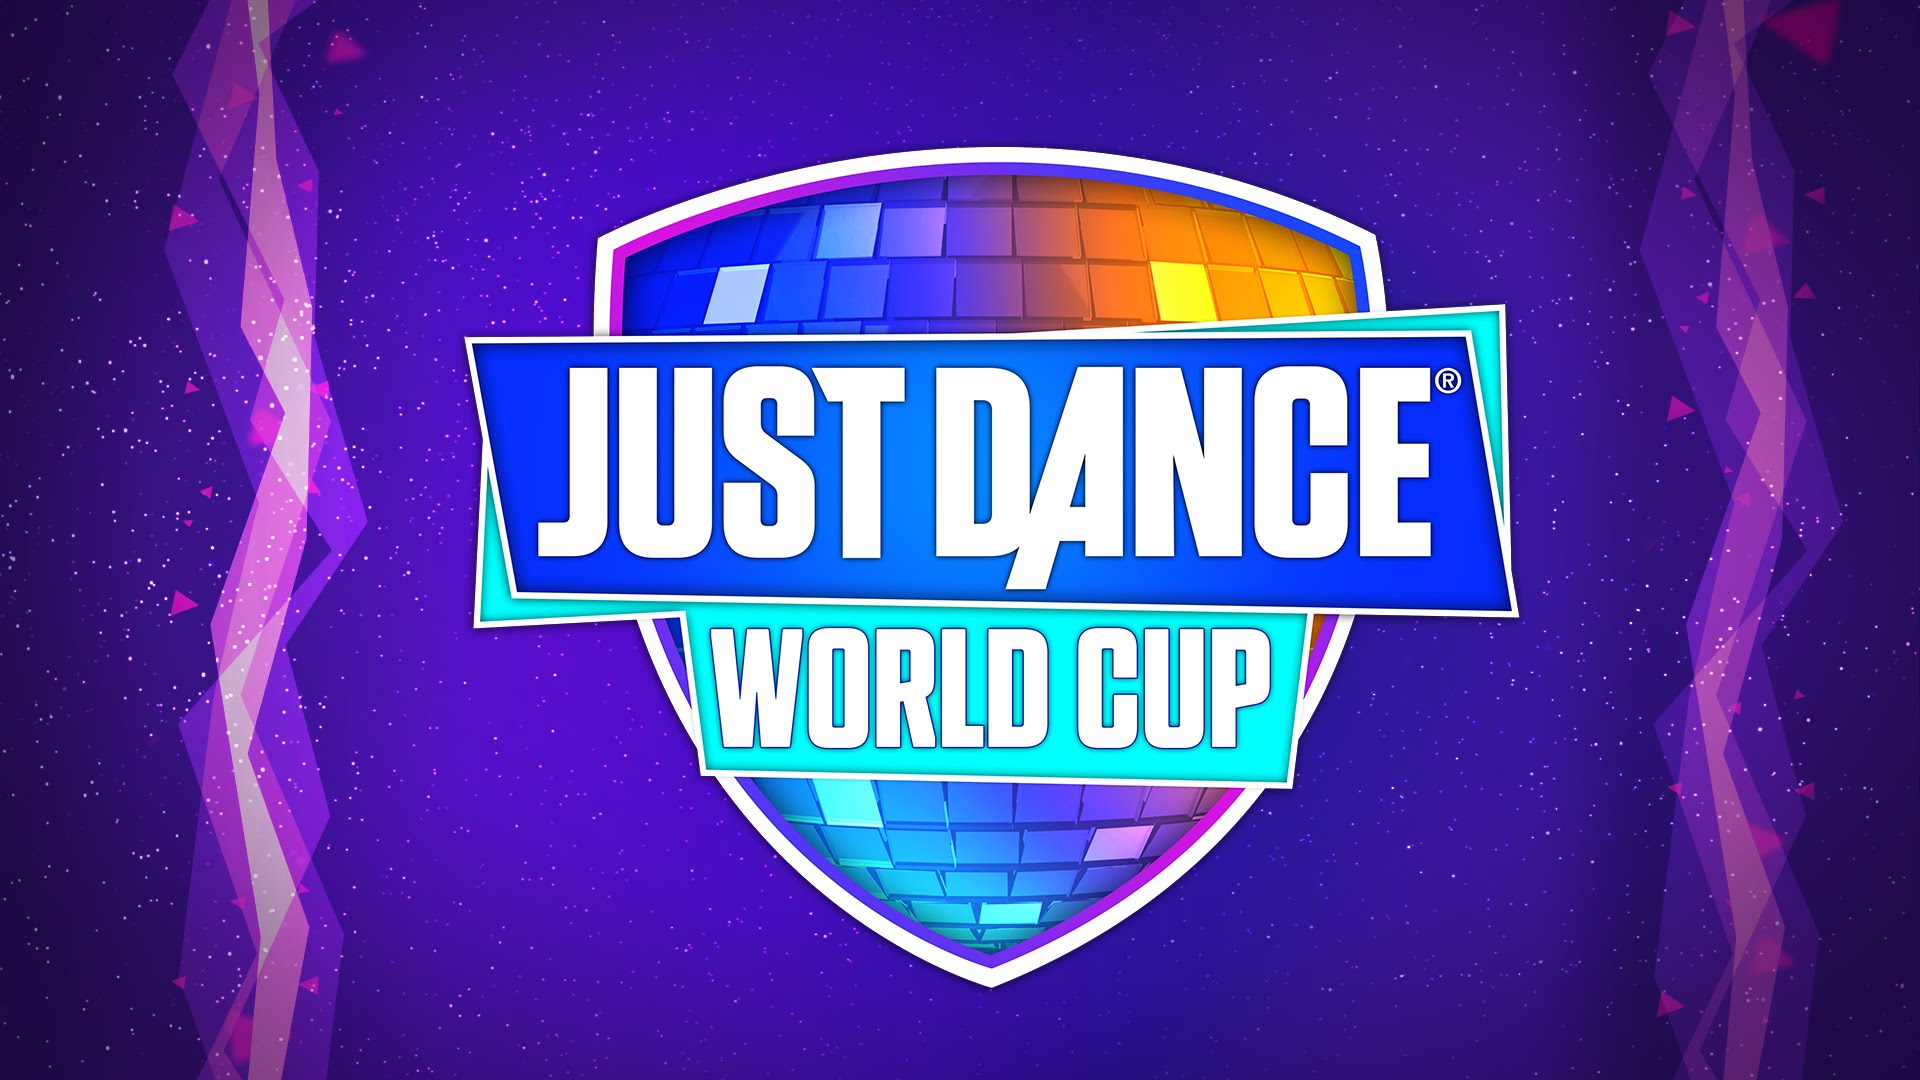 Just Dance World Cup 2017